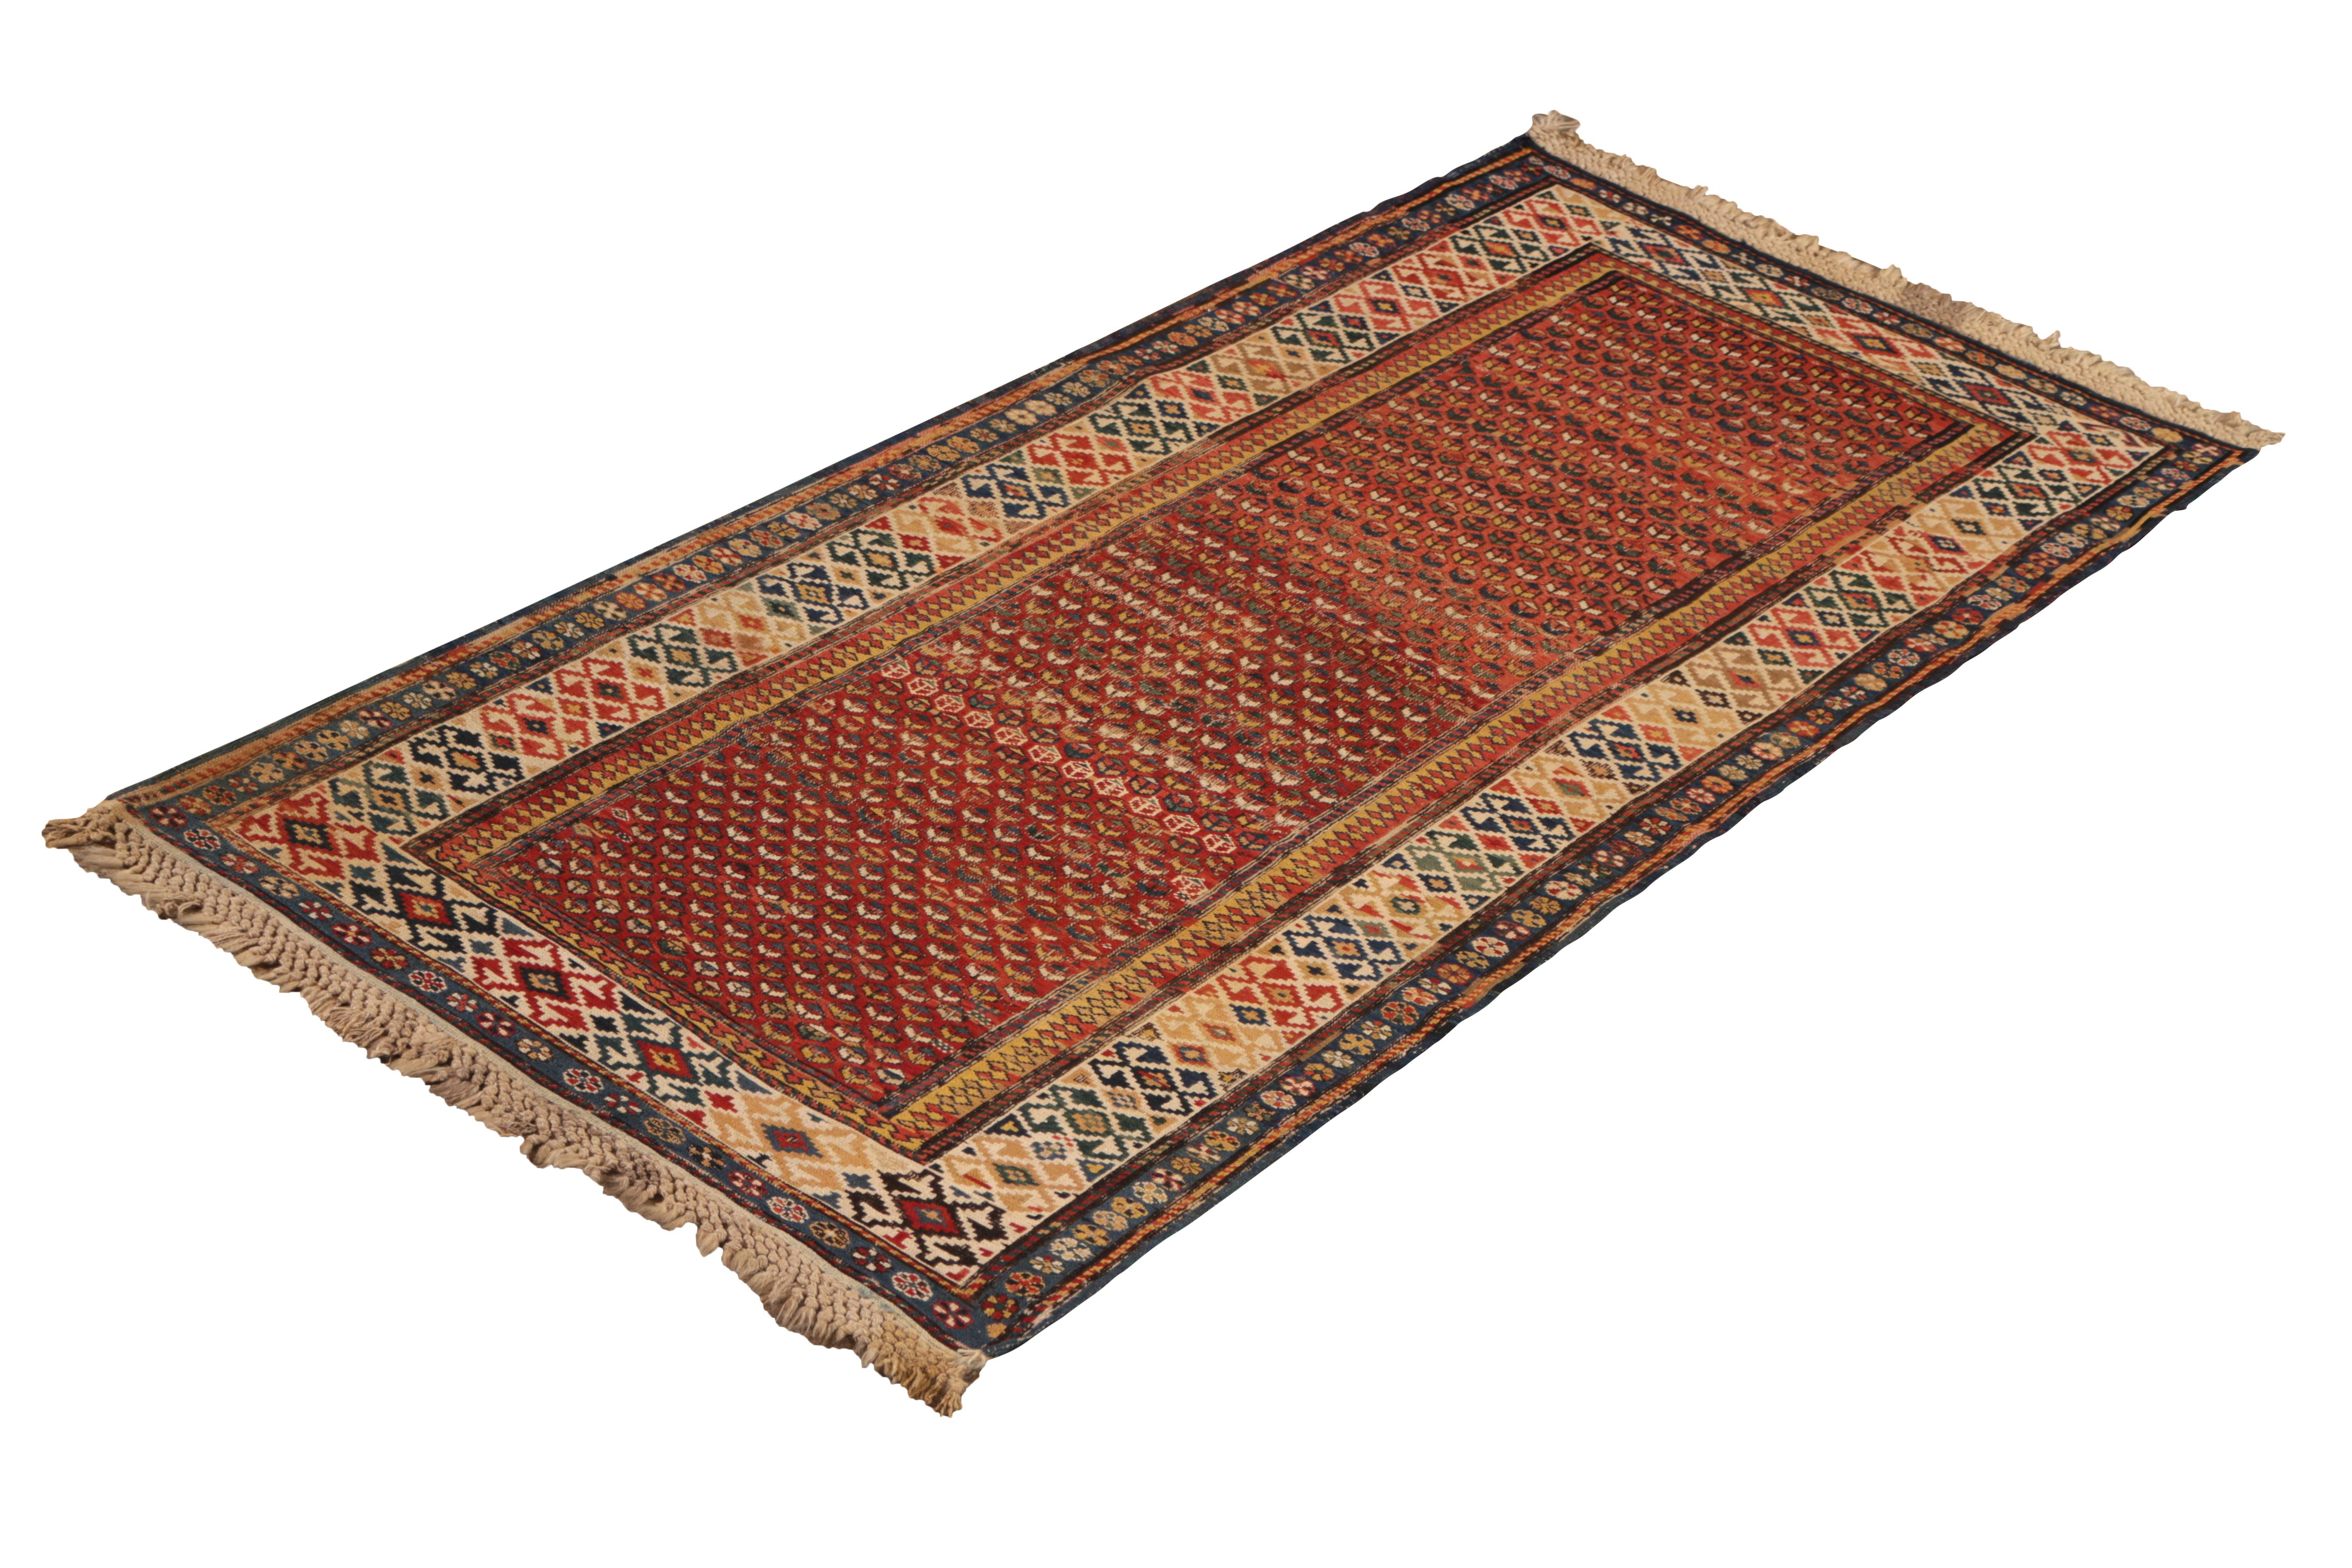 Hand knotted in wool originating from Russia circa 1890-1900, this antique rug connotes a 19th-Century Soumak design with a warm, traditional play of near-autumnal burn red and beige hues complemented by accenting, vibrant gold-yellow, blue, and